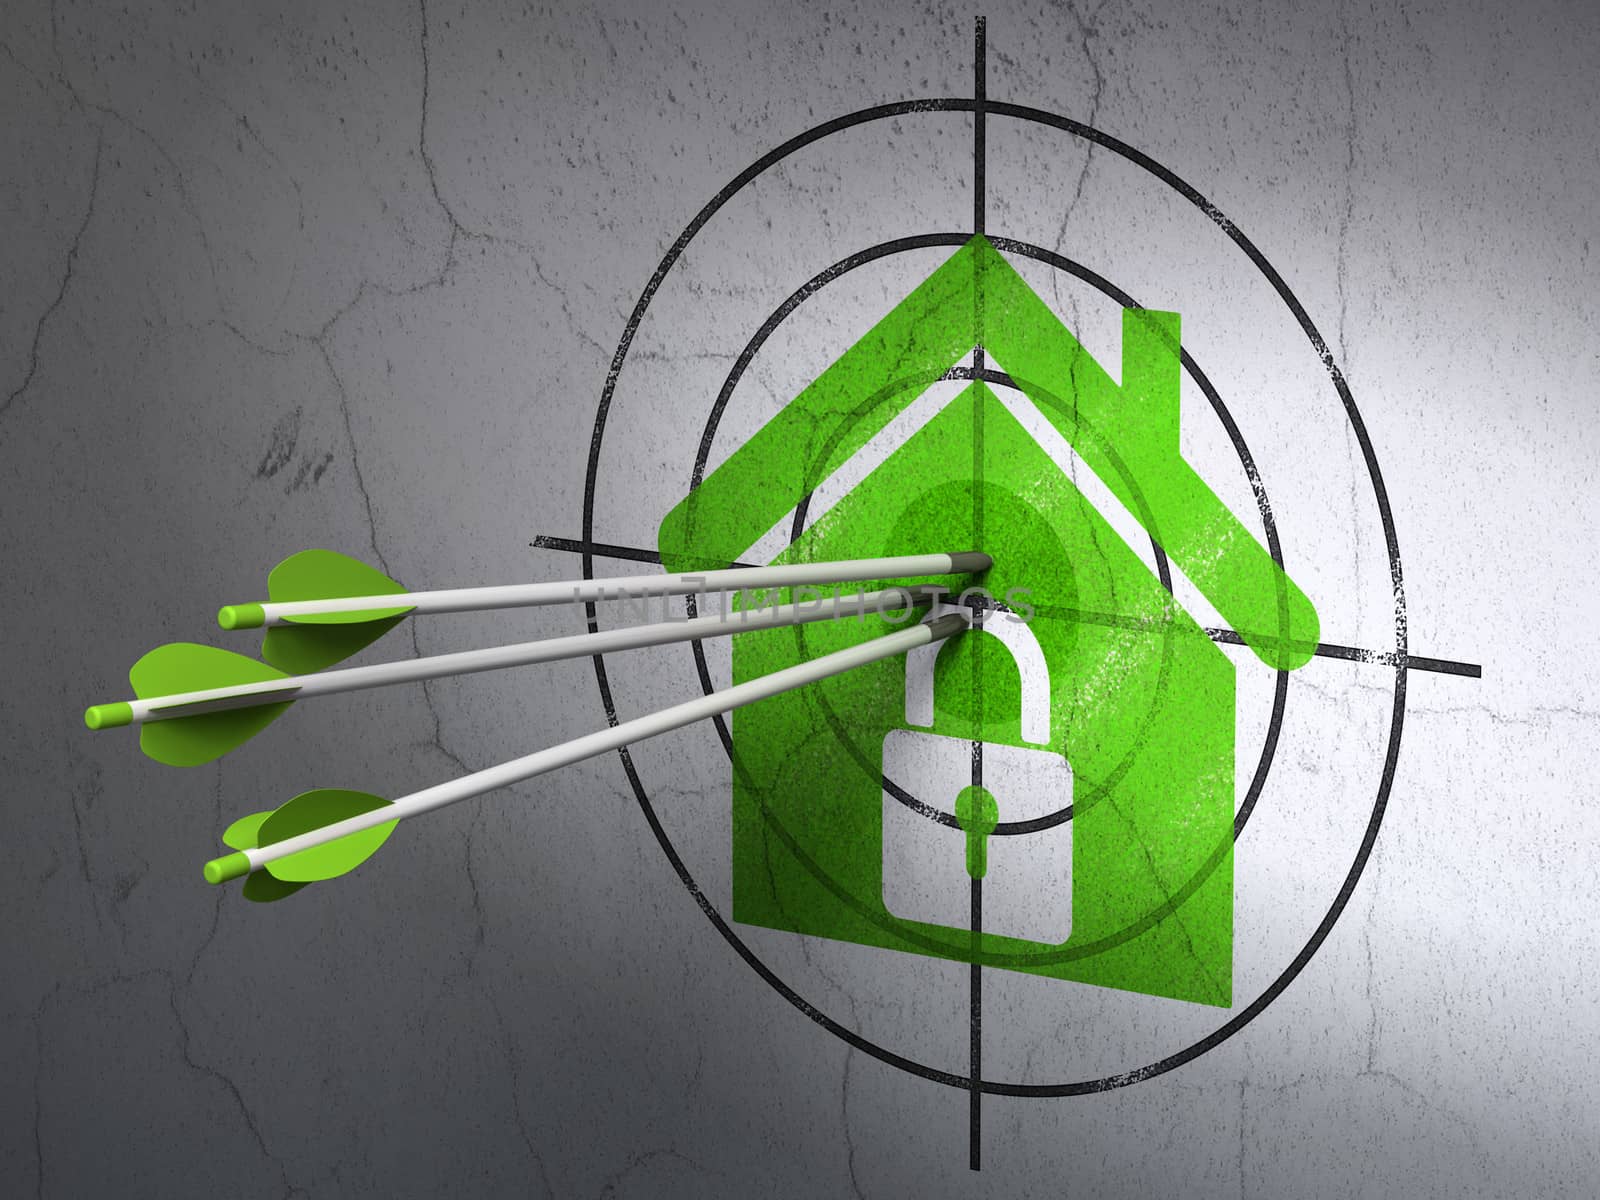 Success security concept: arrows hitting the center of Green Home target on wall background, 3d render